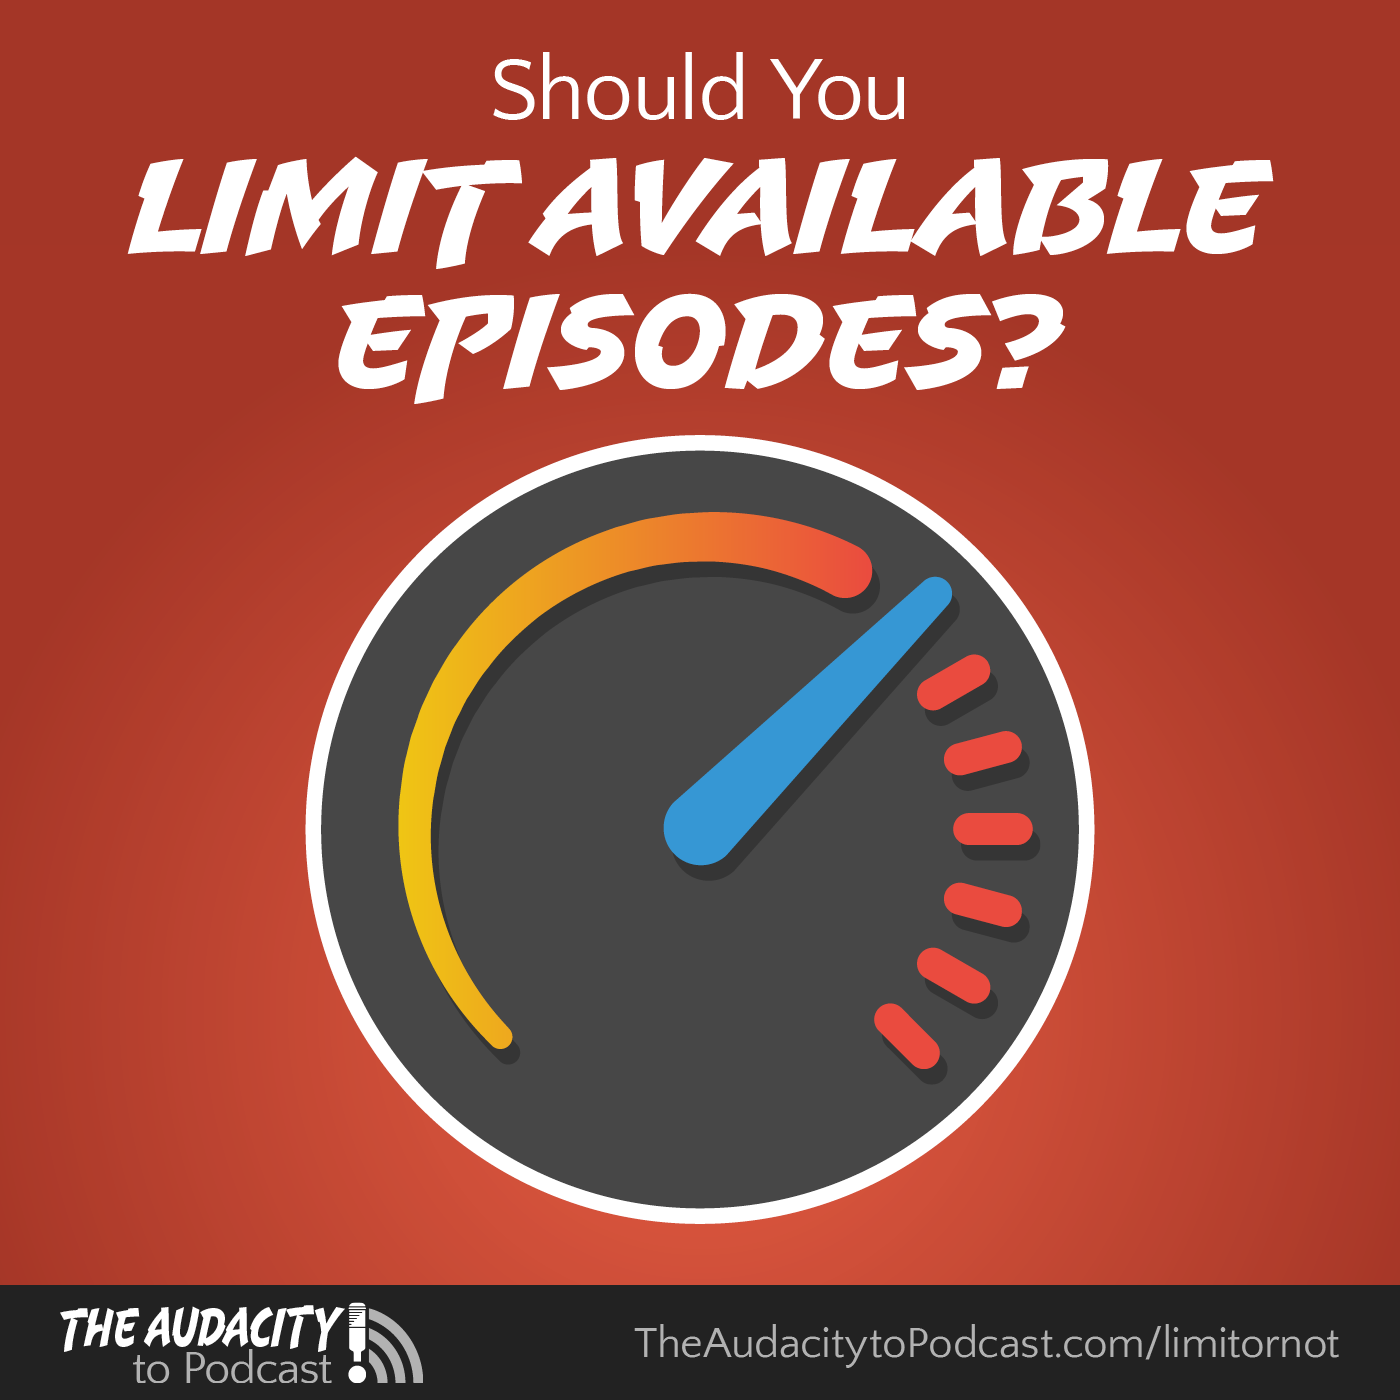 Should You Limit Your Available Podcast Episodes?